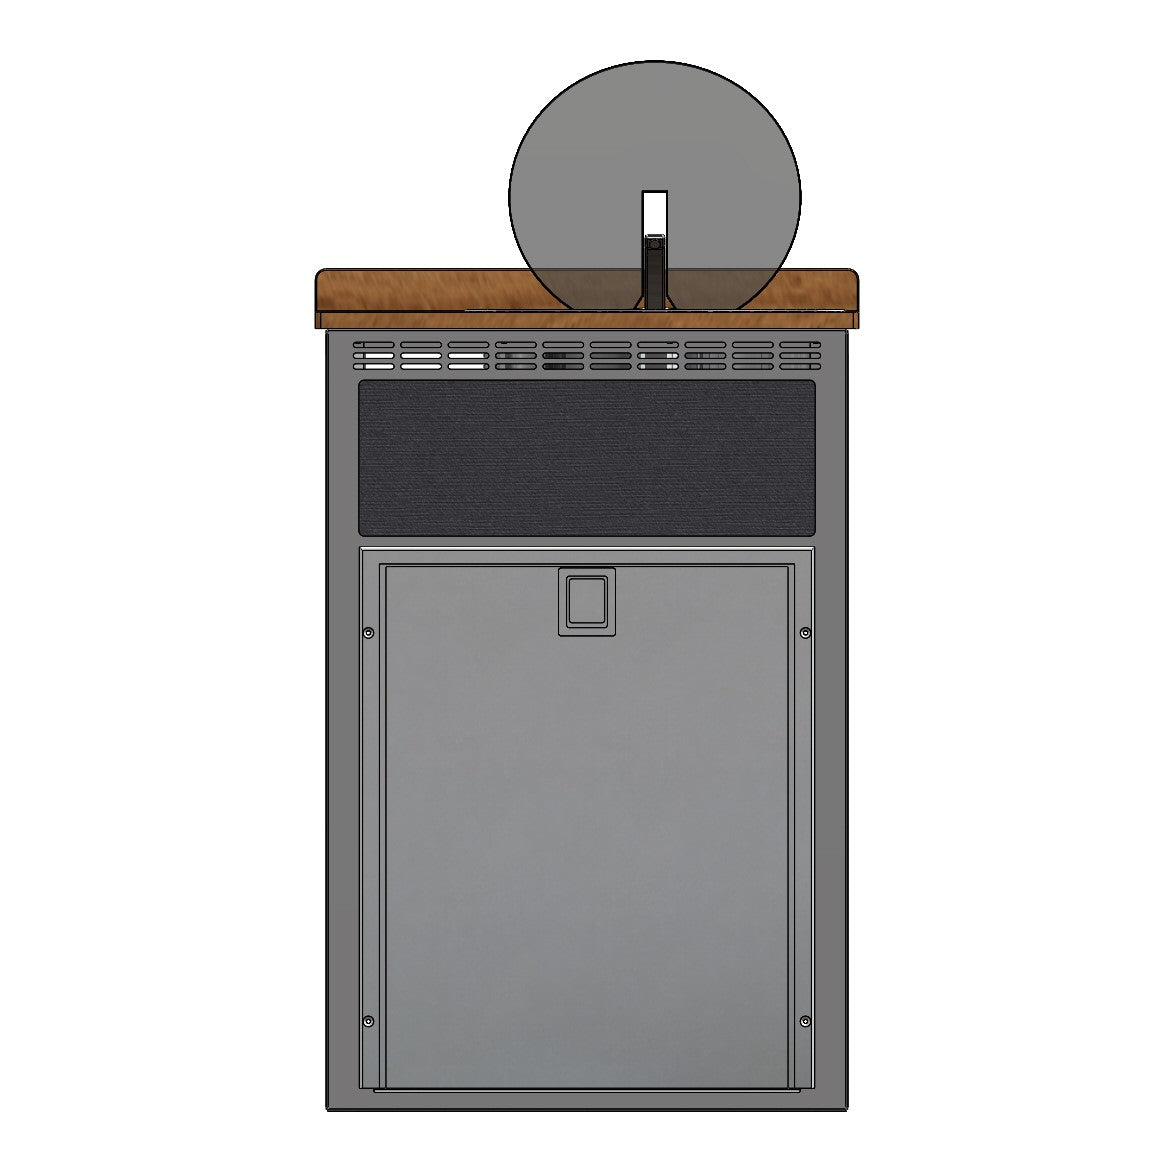 24in Galley - Isotherm 85 Fridge Base Cabinet